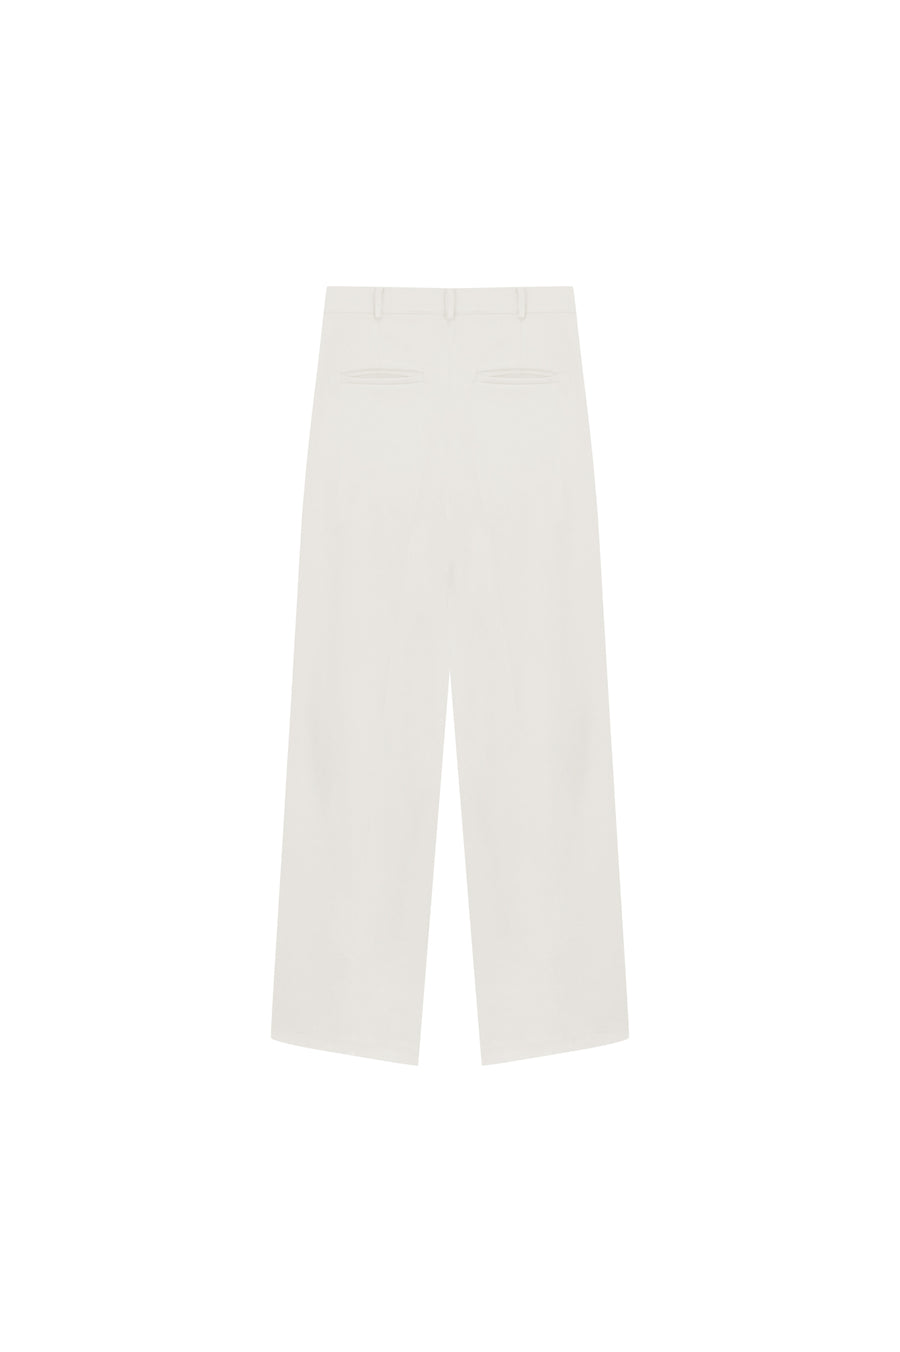 The Marcel white pants